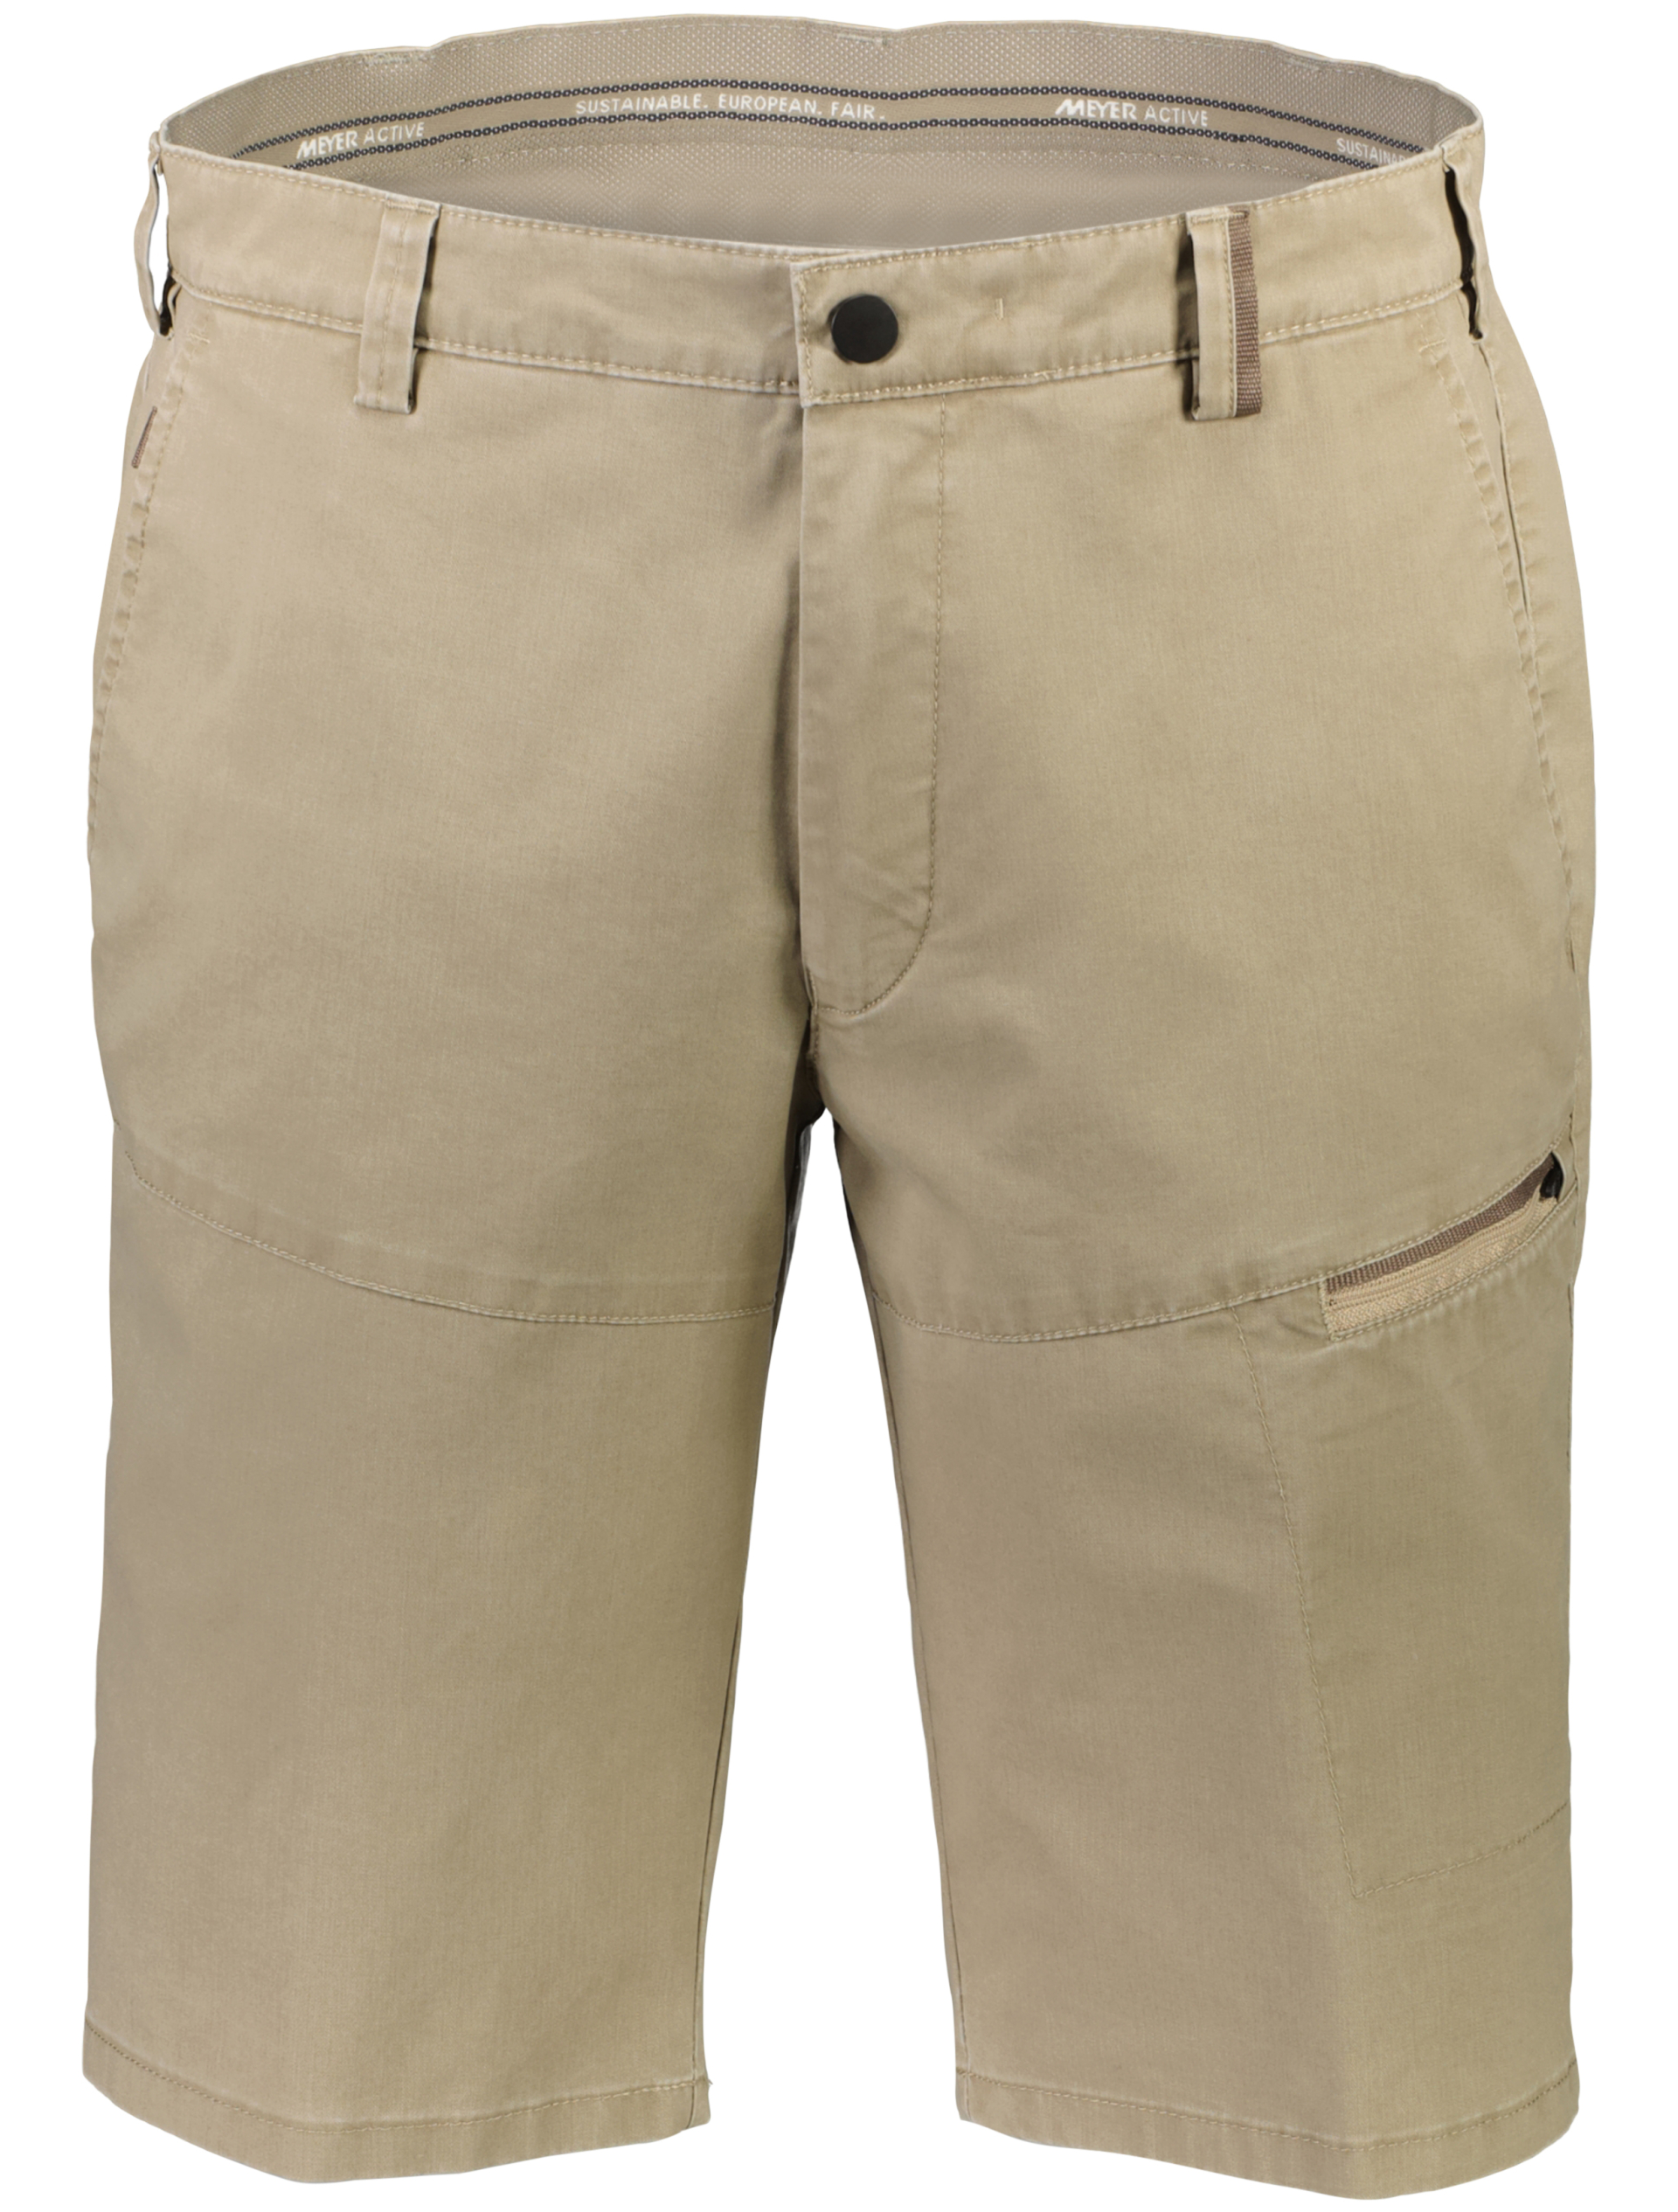 Meyer Casual shorts sand / 43 sand